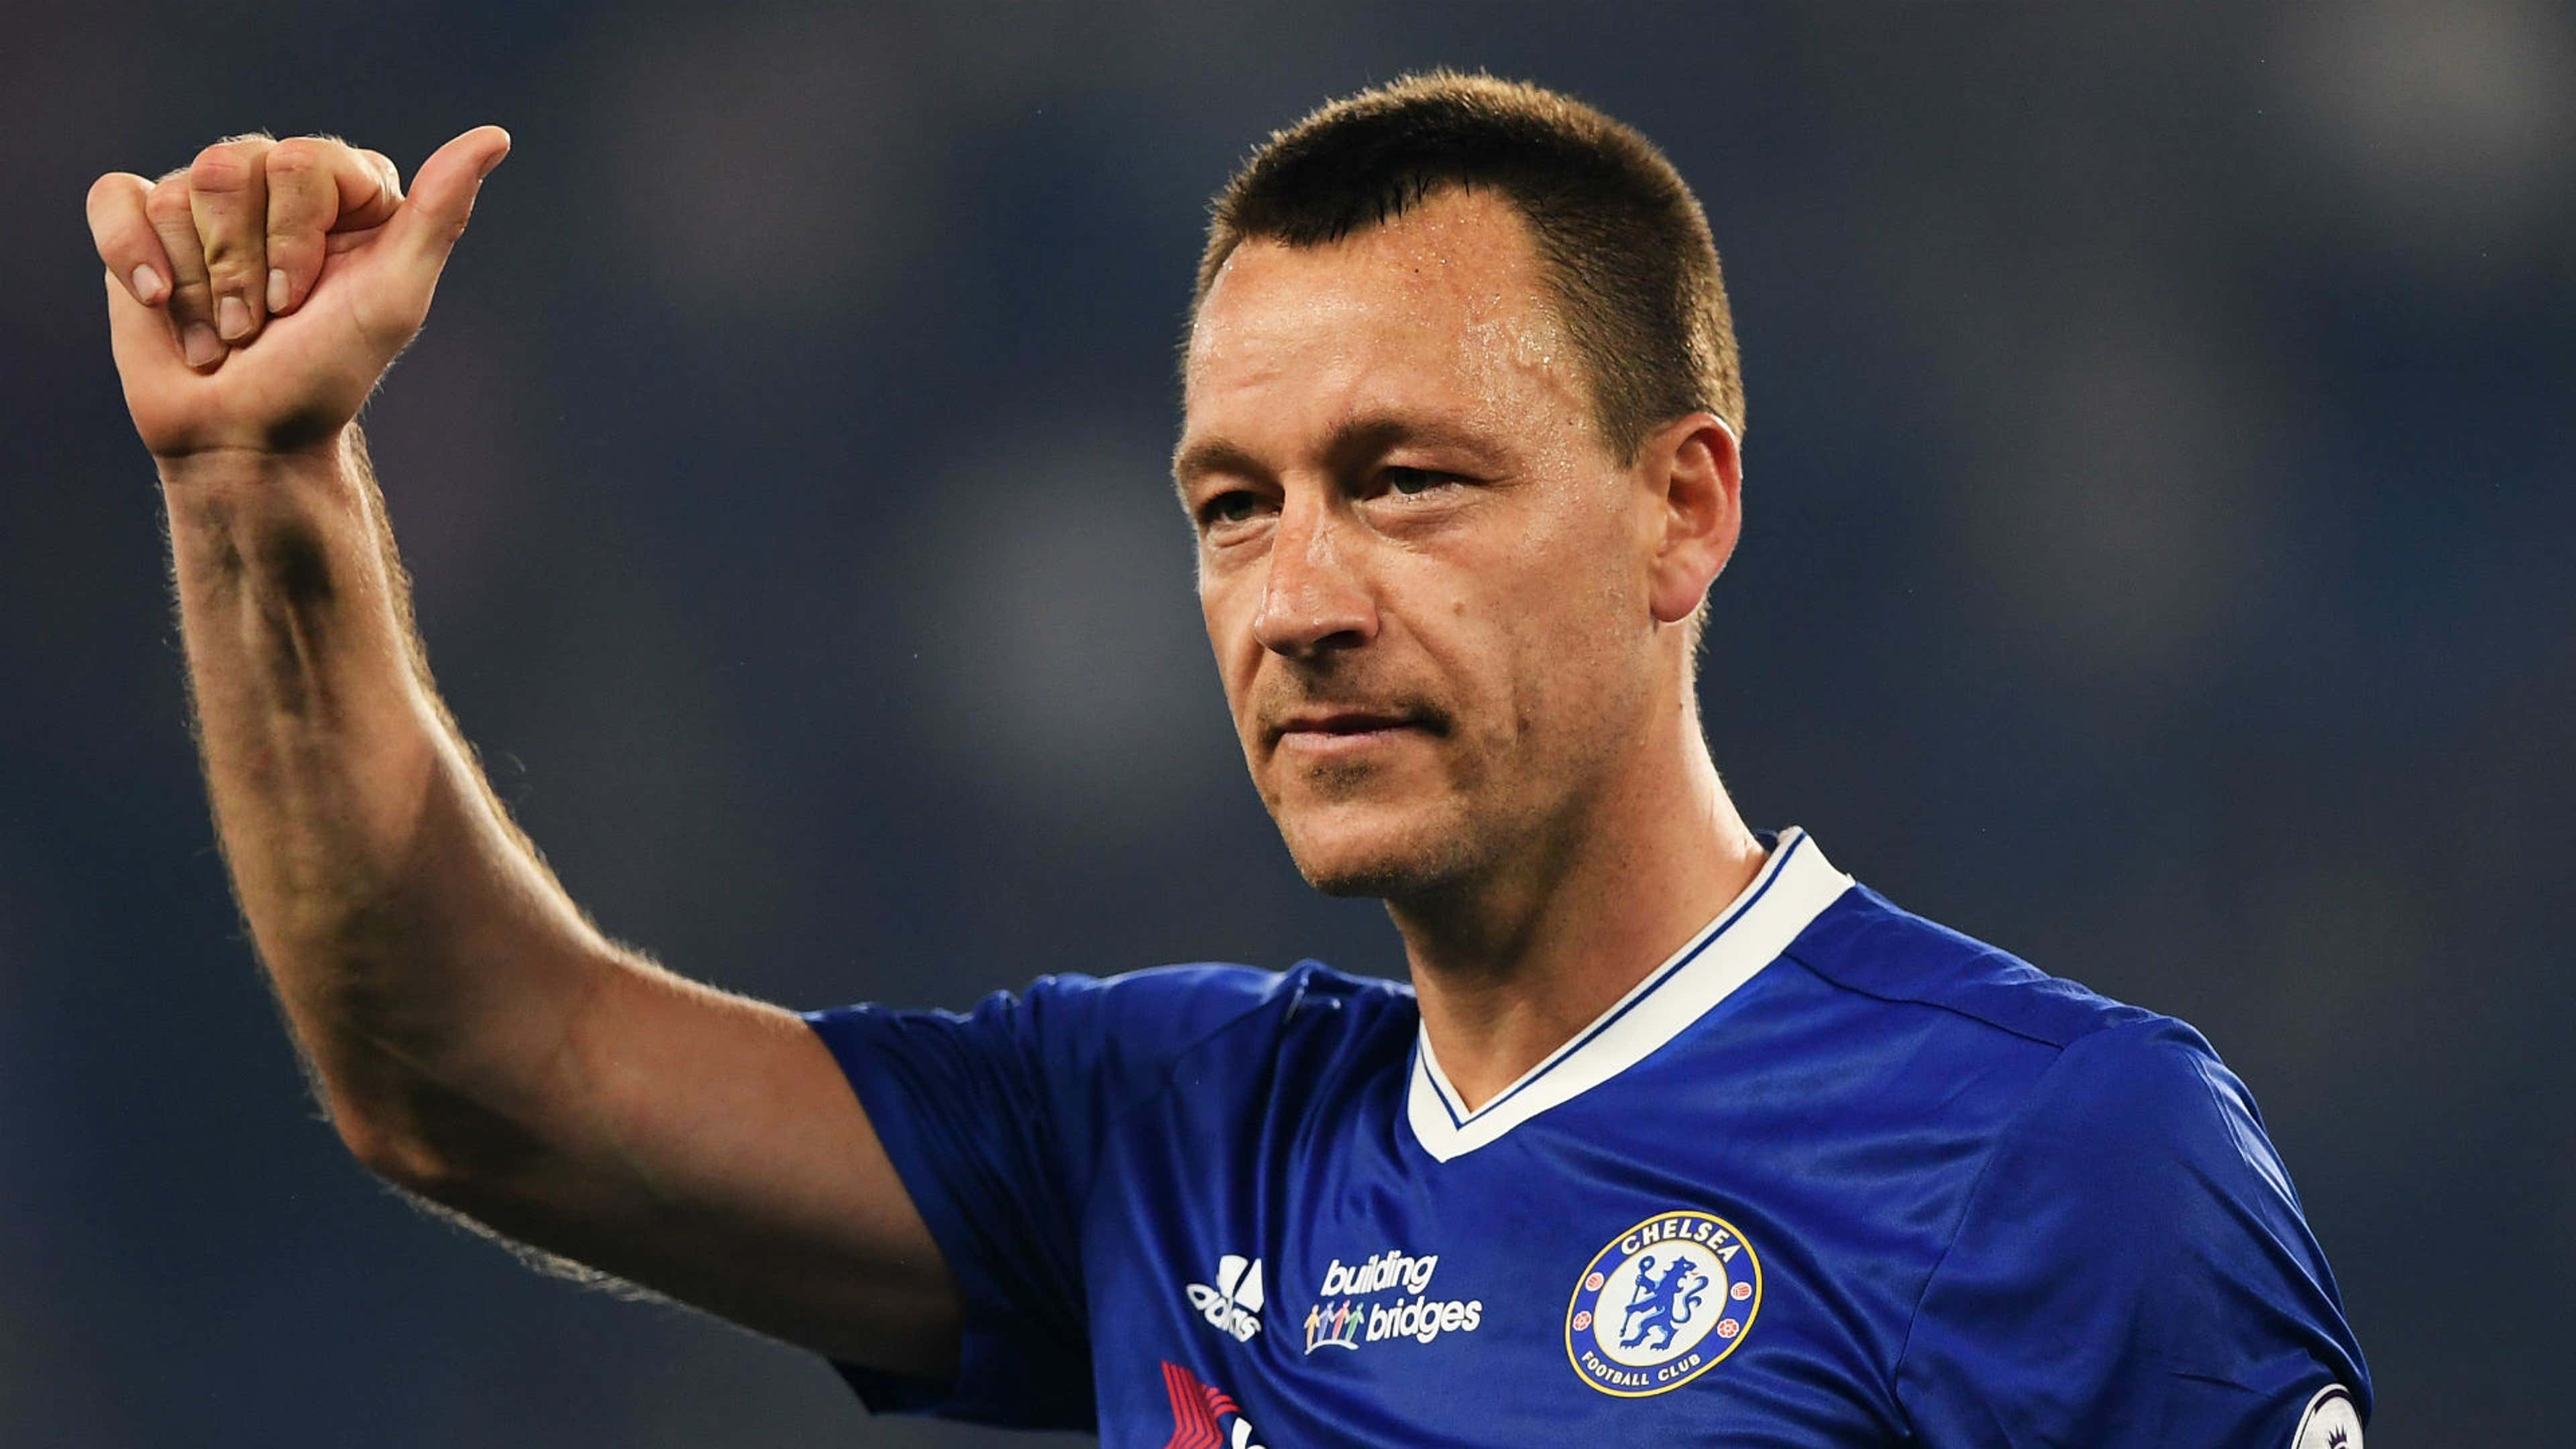  John Terry, a former Chelsea captain, celebrates a victory while wearing the team's blue kit.